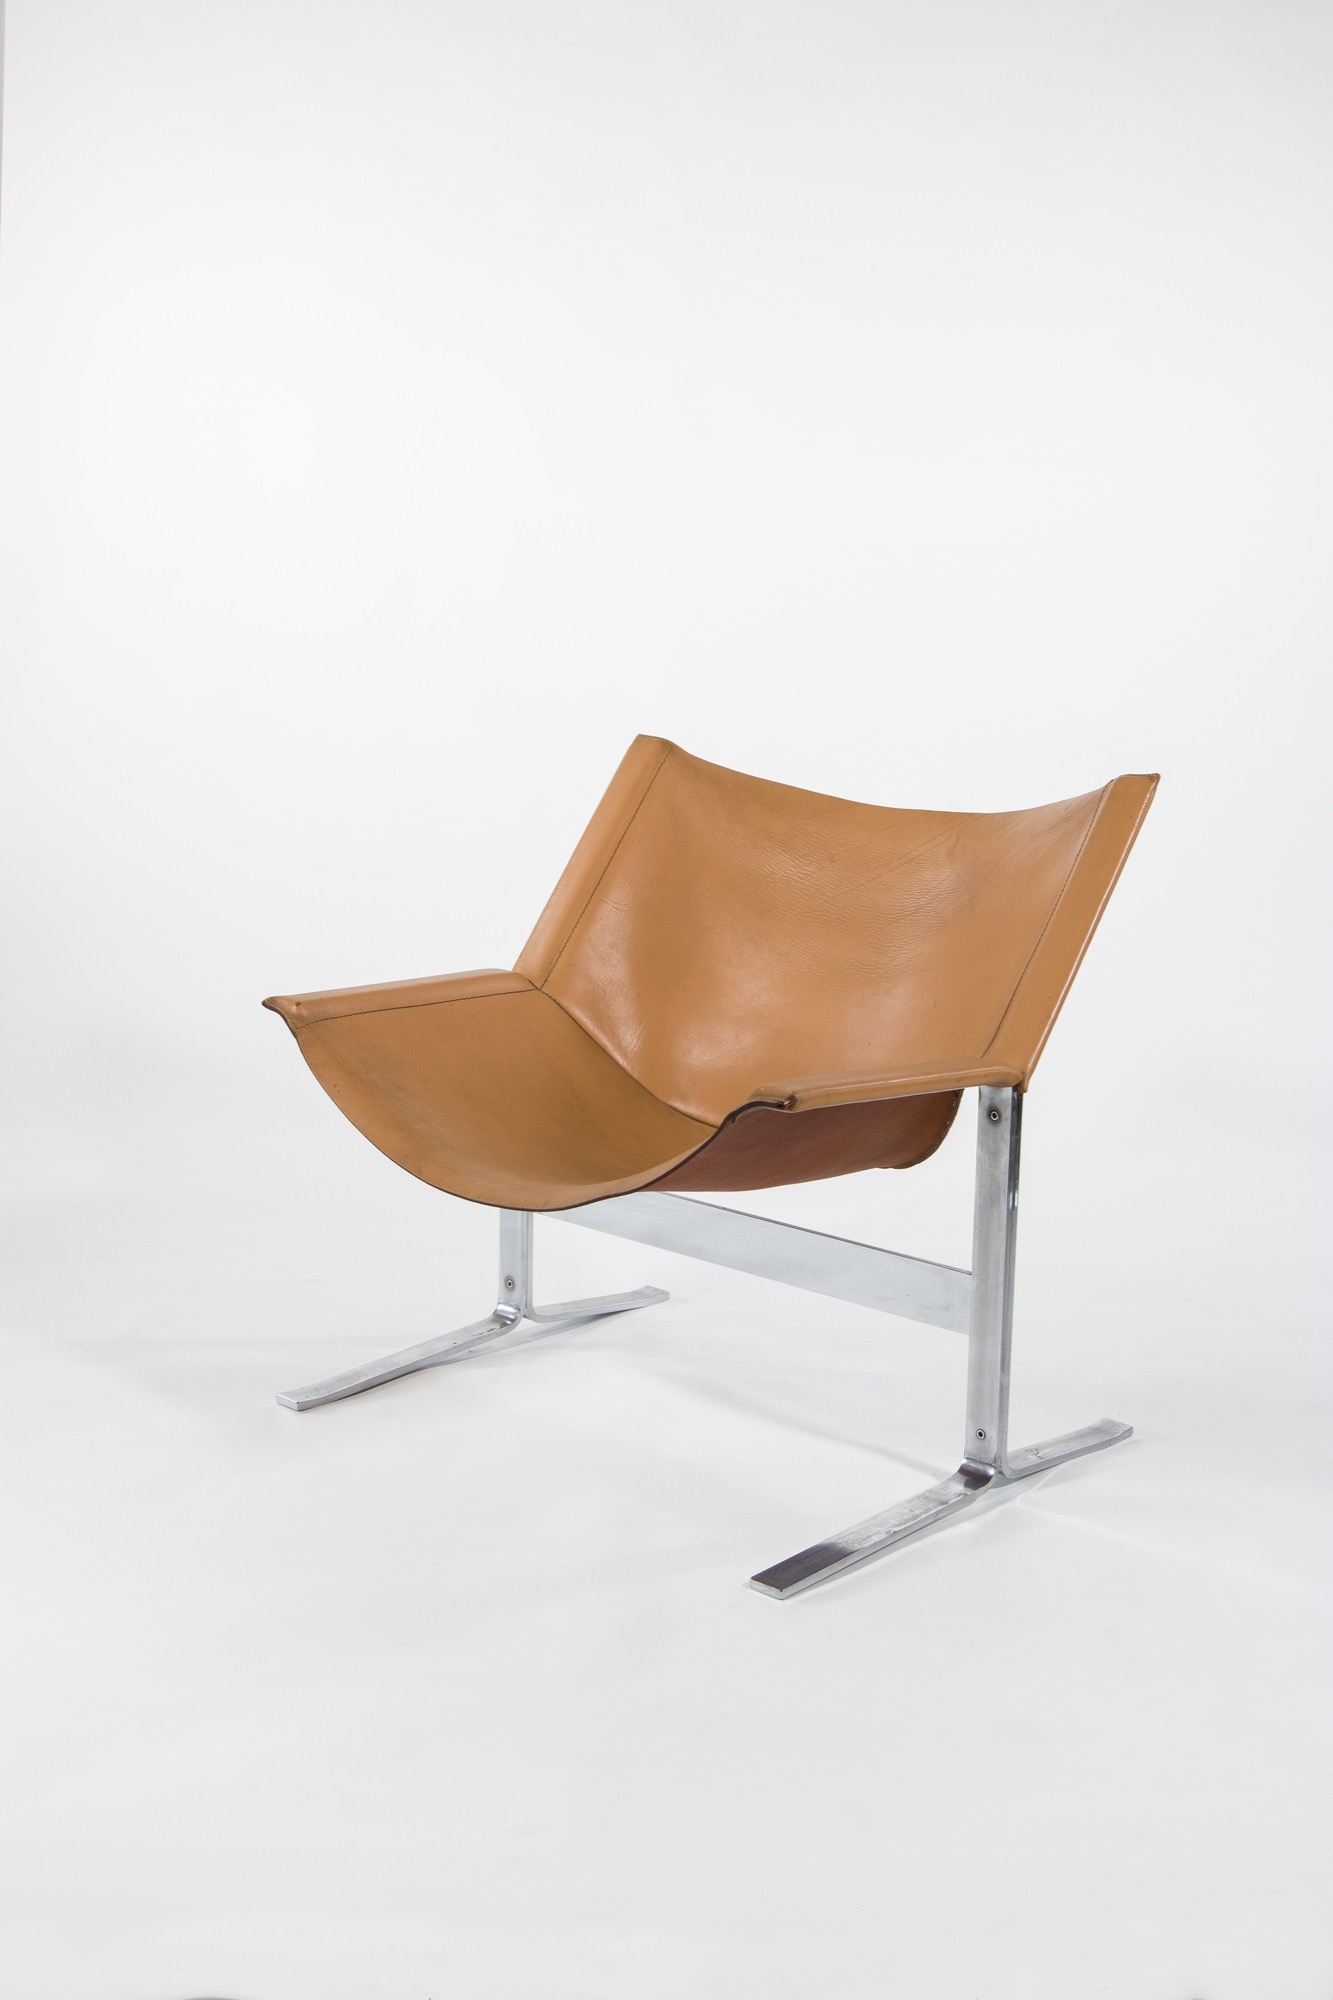 Clement Meadmore, <em>Chair (model 248)</em>, 1963,steel, leather. Harris/Atkins Collection.